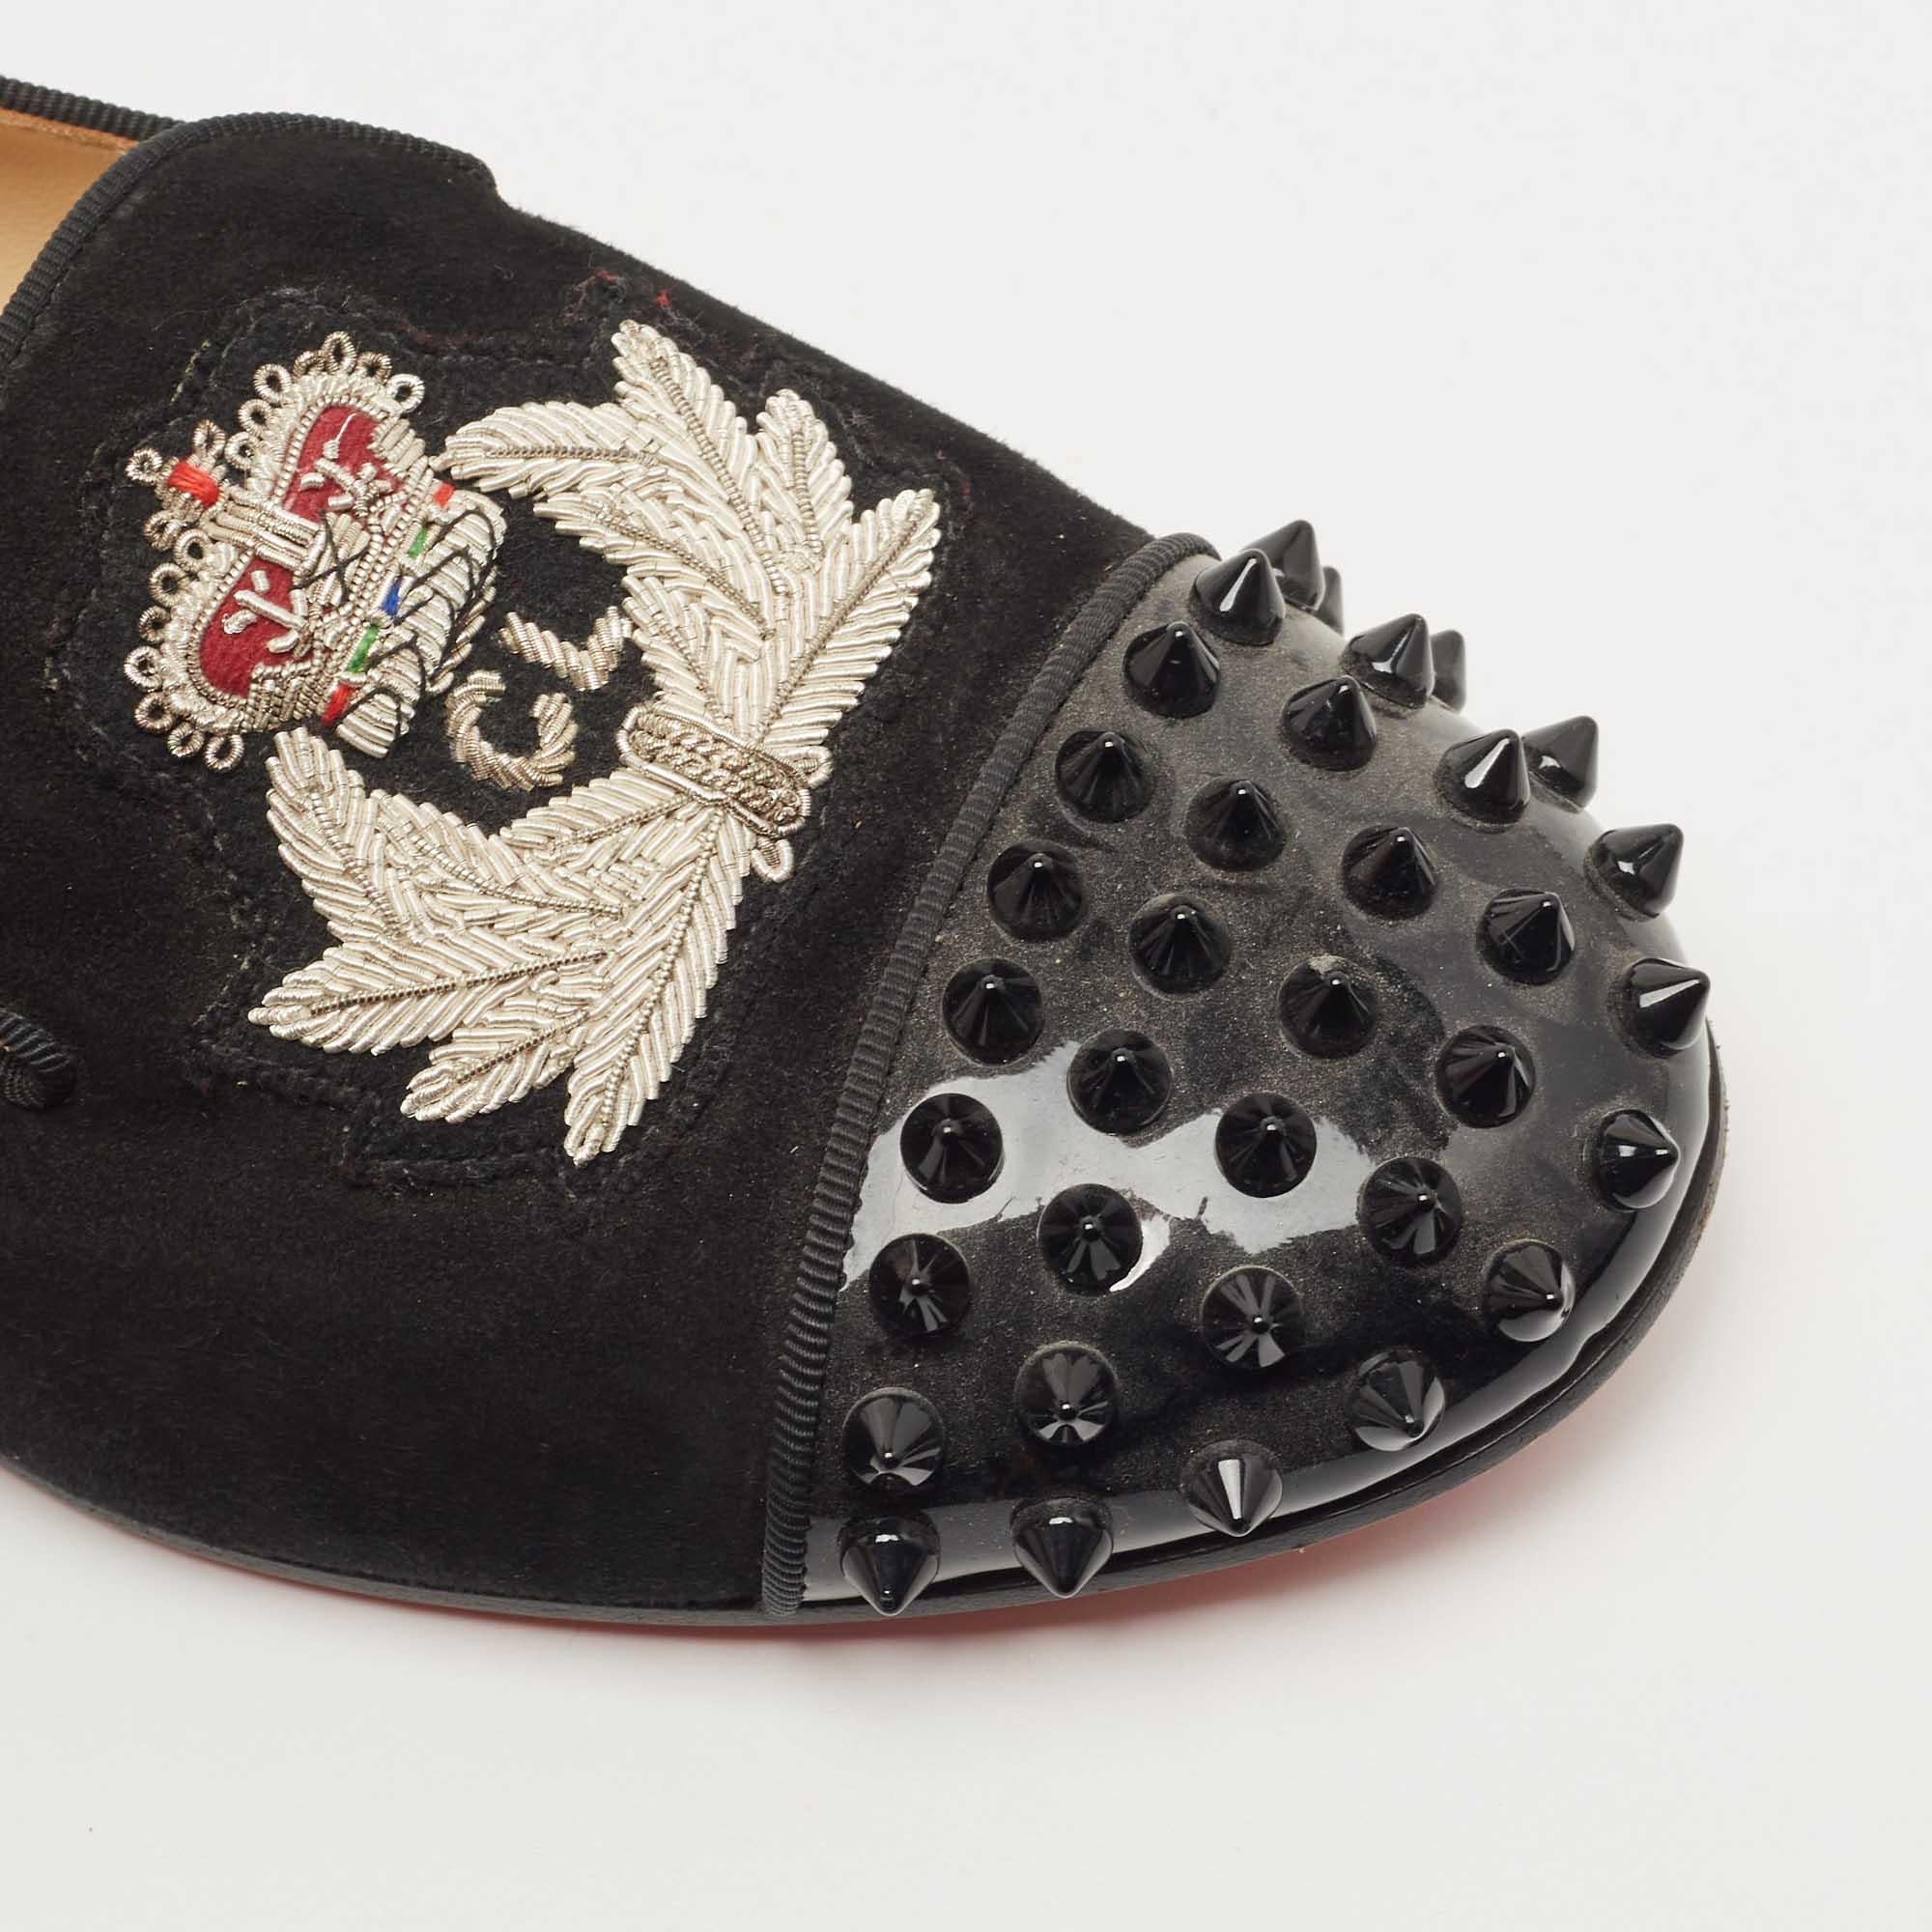 Christian Louboutin Black Suede Harvanana Spiked Smoking Slippers Size 36.5 For Sale 3